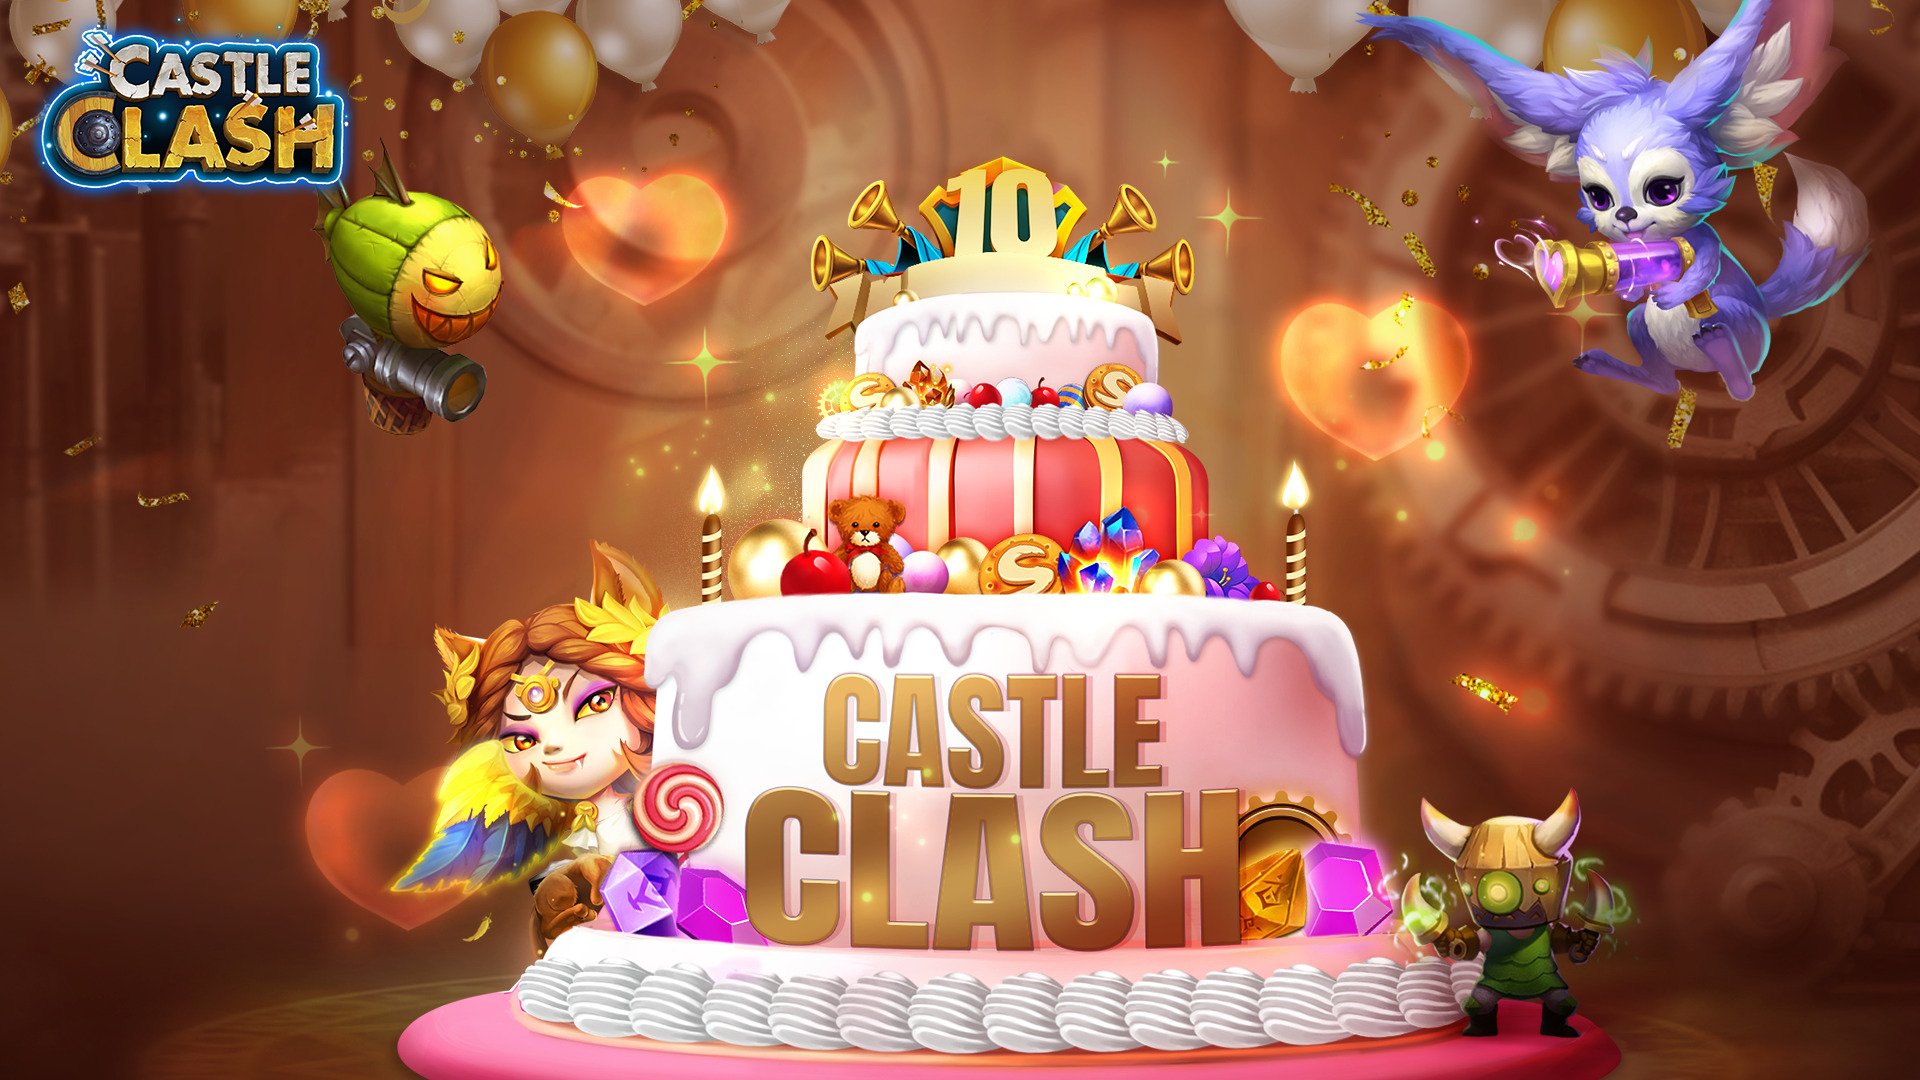 Castle Clash Celebrates its Tenth Anniversary With A Series of Exciting Events